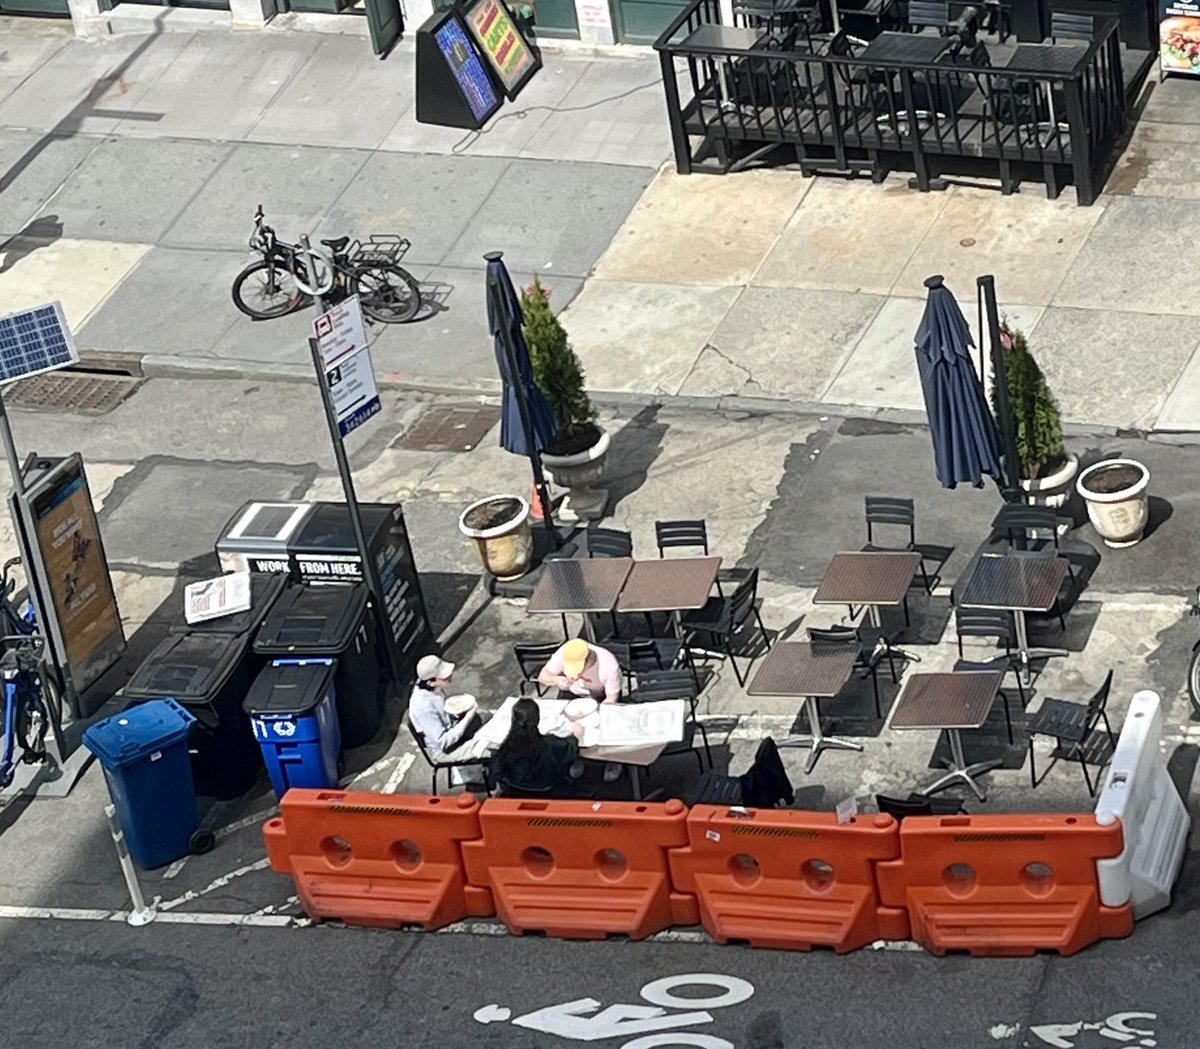 Are there any DOH regulations against Open Restaurant seating adjacent to five trash receptacles illegally placed in a pedestrian plaza 24/7, along with two others from ⁦@dumbobrooklyn⁩ BID? ⁦@LincolnRestler⁩ ⁦@NYC_DOT⁩ ⁦@NYCSanitation⁩ ⁦@nycHealthy⁩